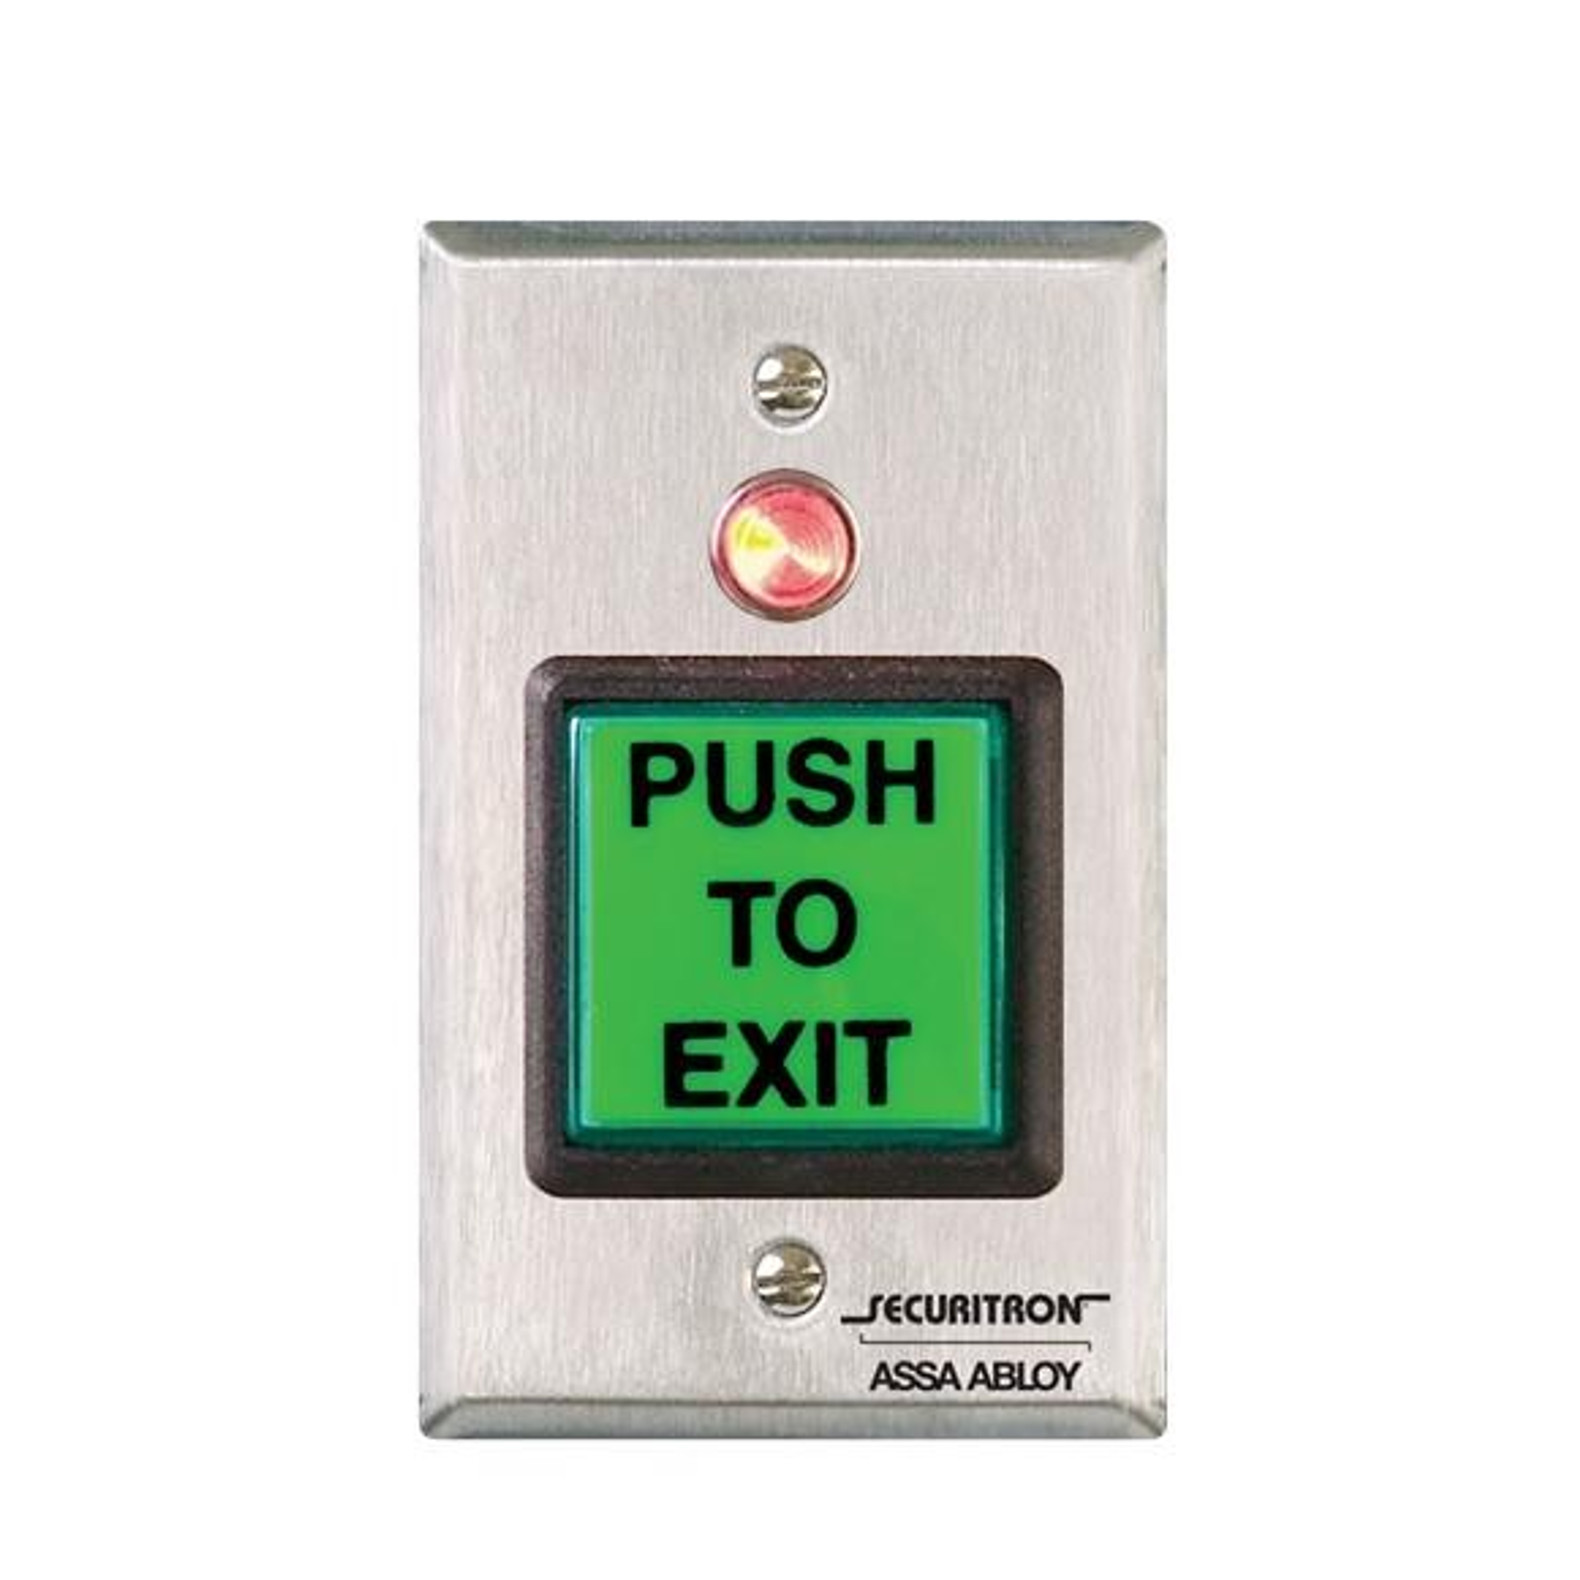 Illuminated Green Push-to-Exit Button